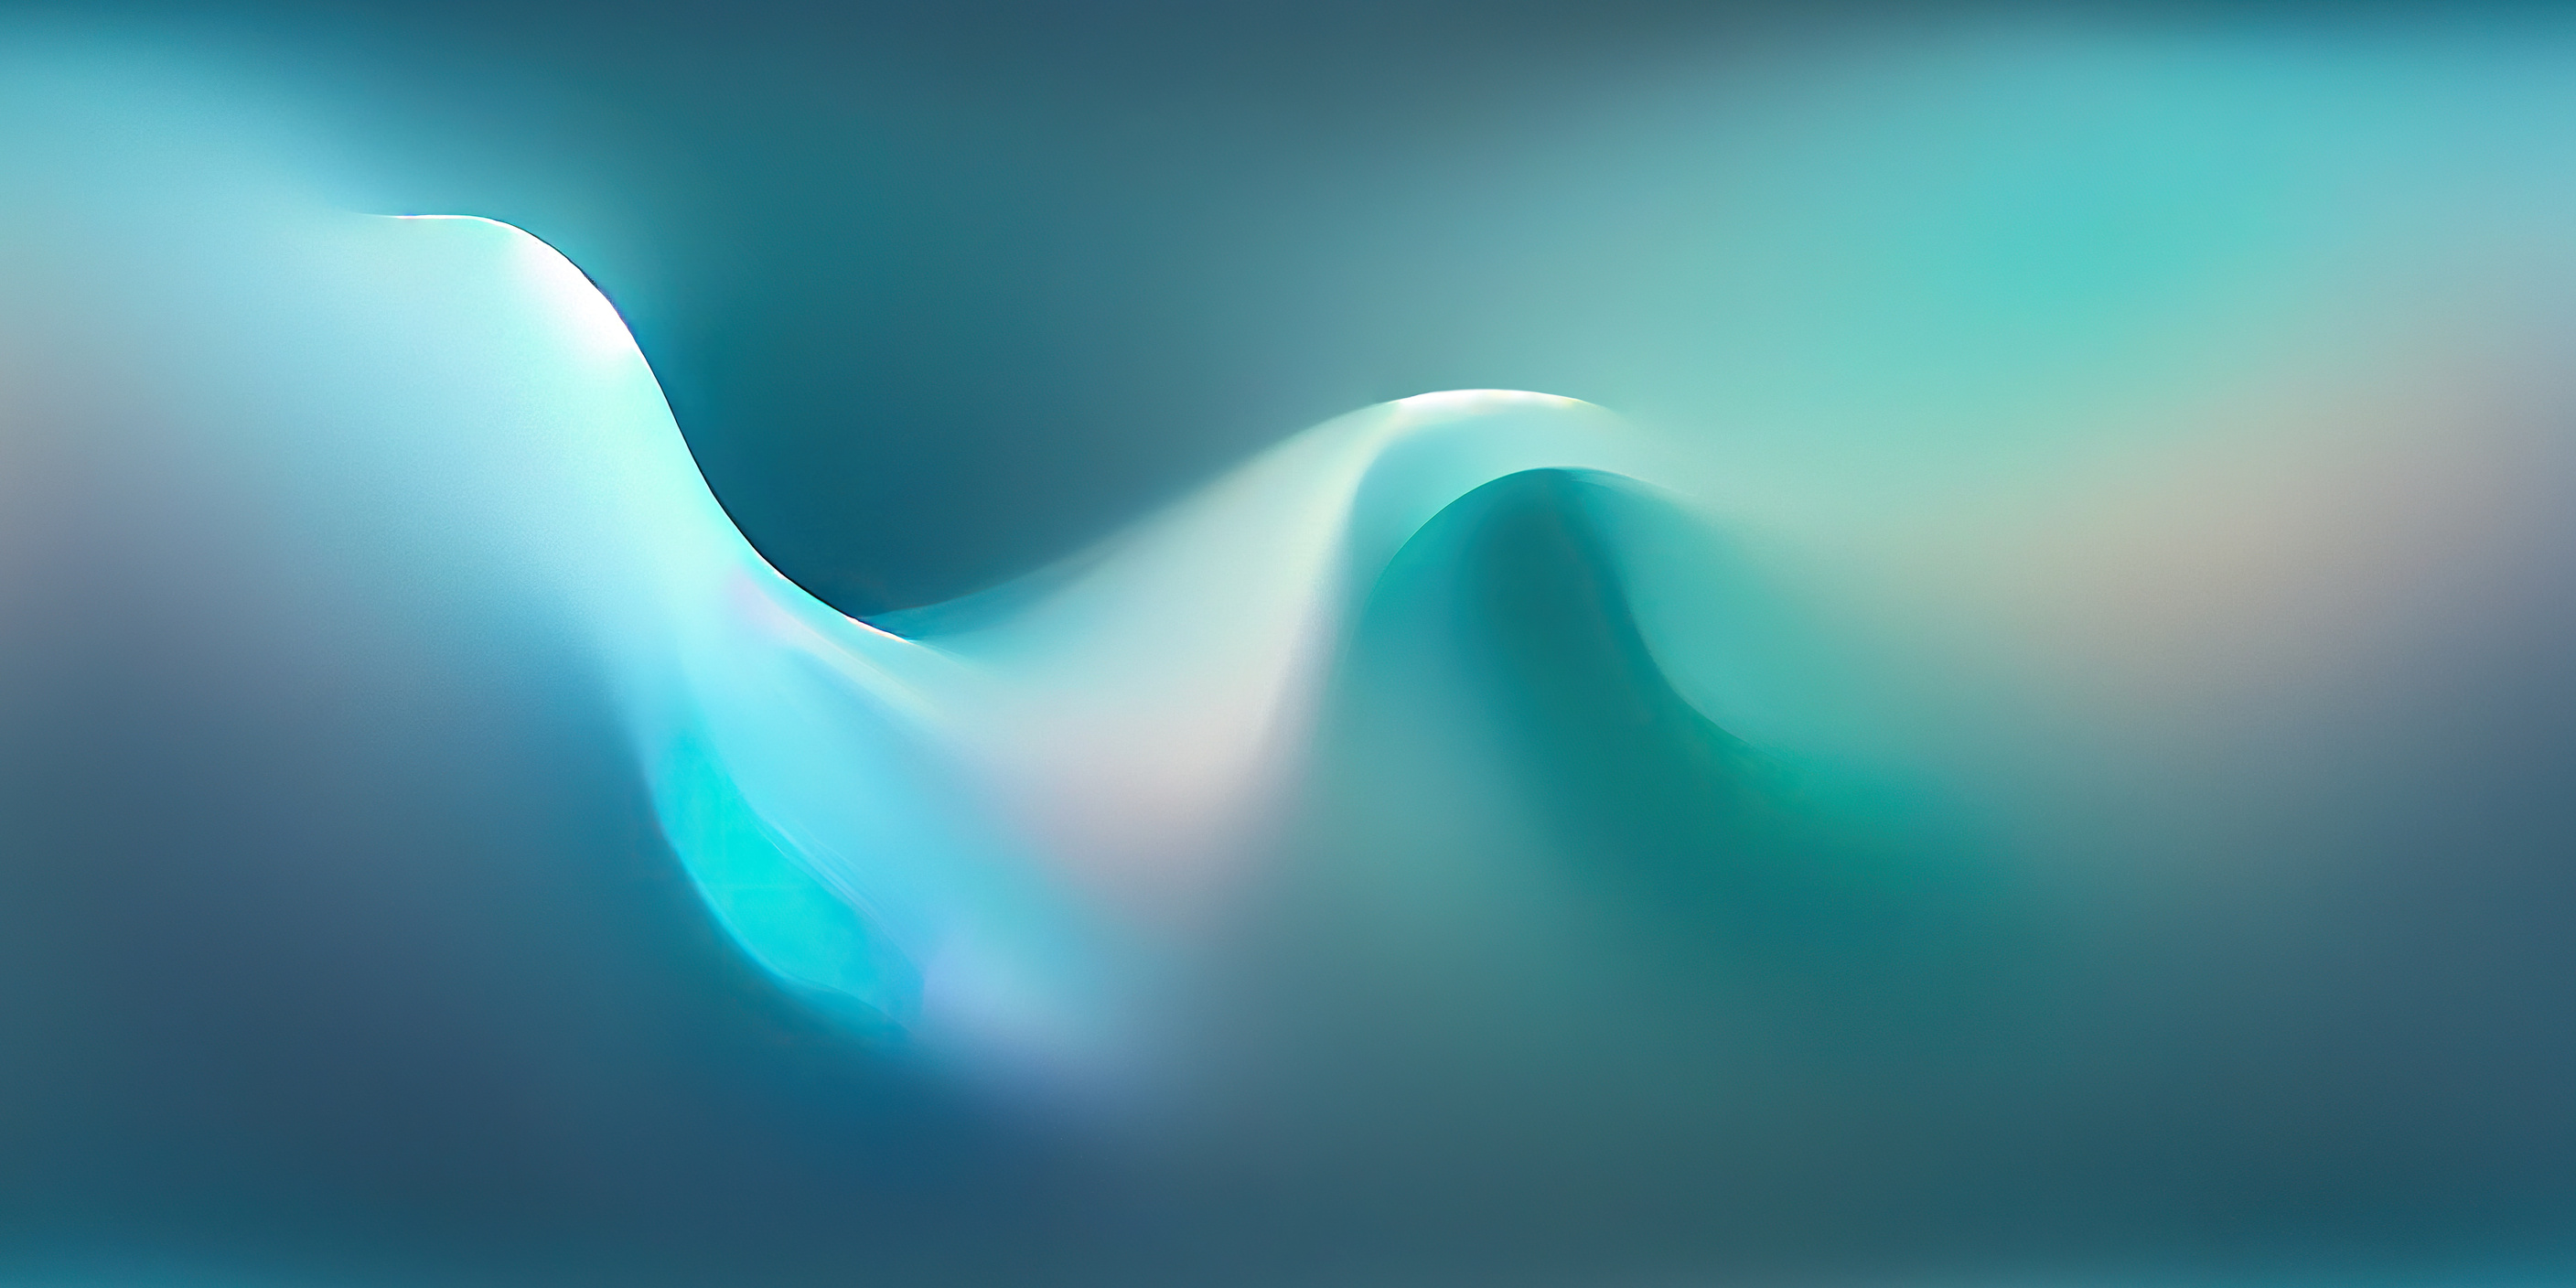 Blurring effect on a smooth flowing flow of bluish-white waves.